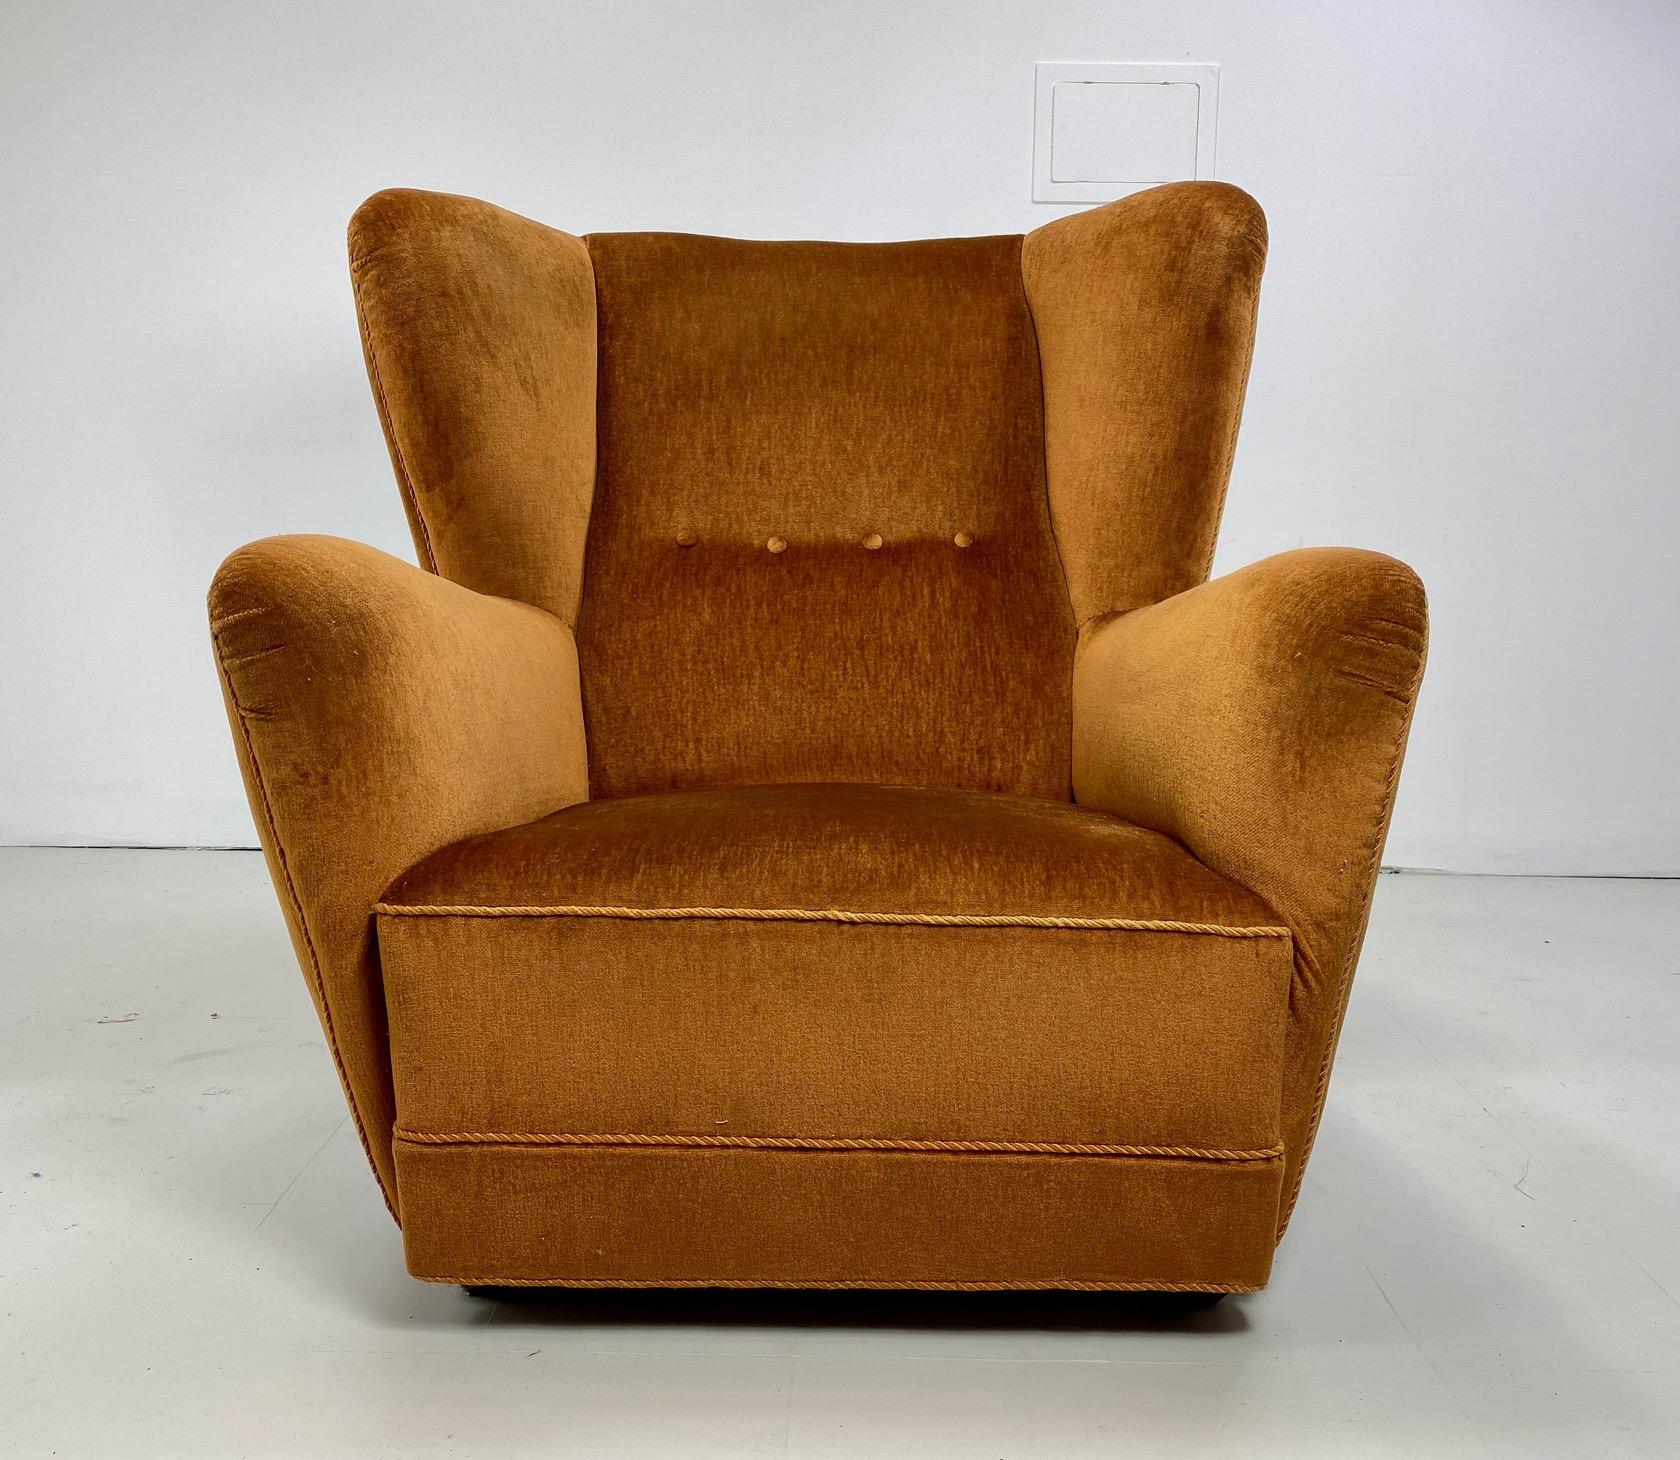 1940's Danish lounge chair. Large scale chair. High quality velvet upholstery. Wood ball feet on front of the chair.